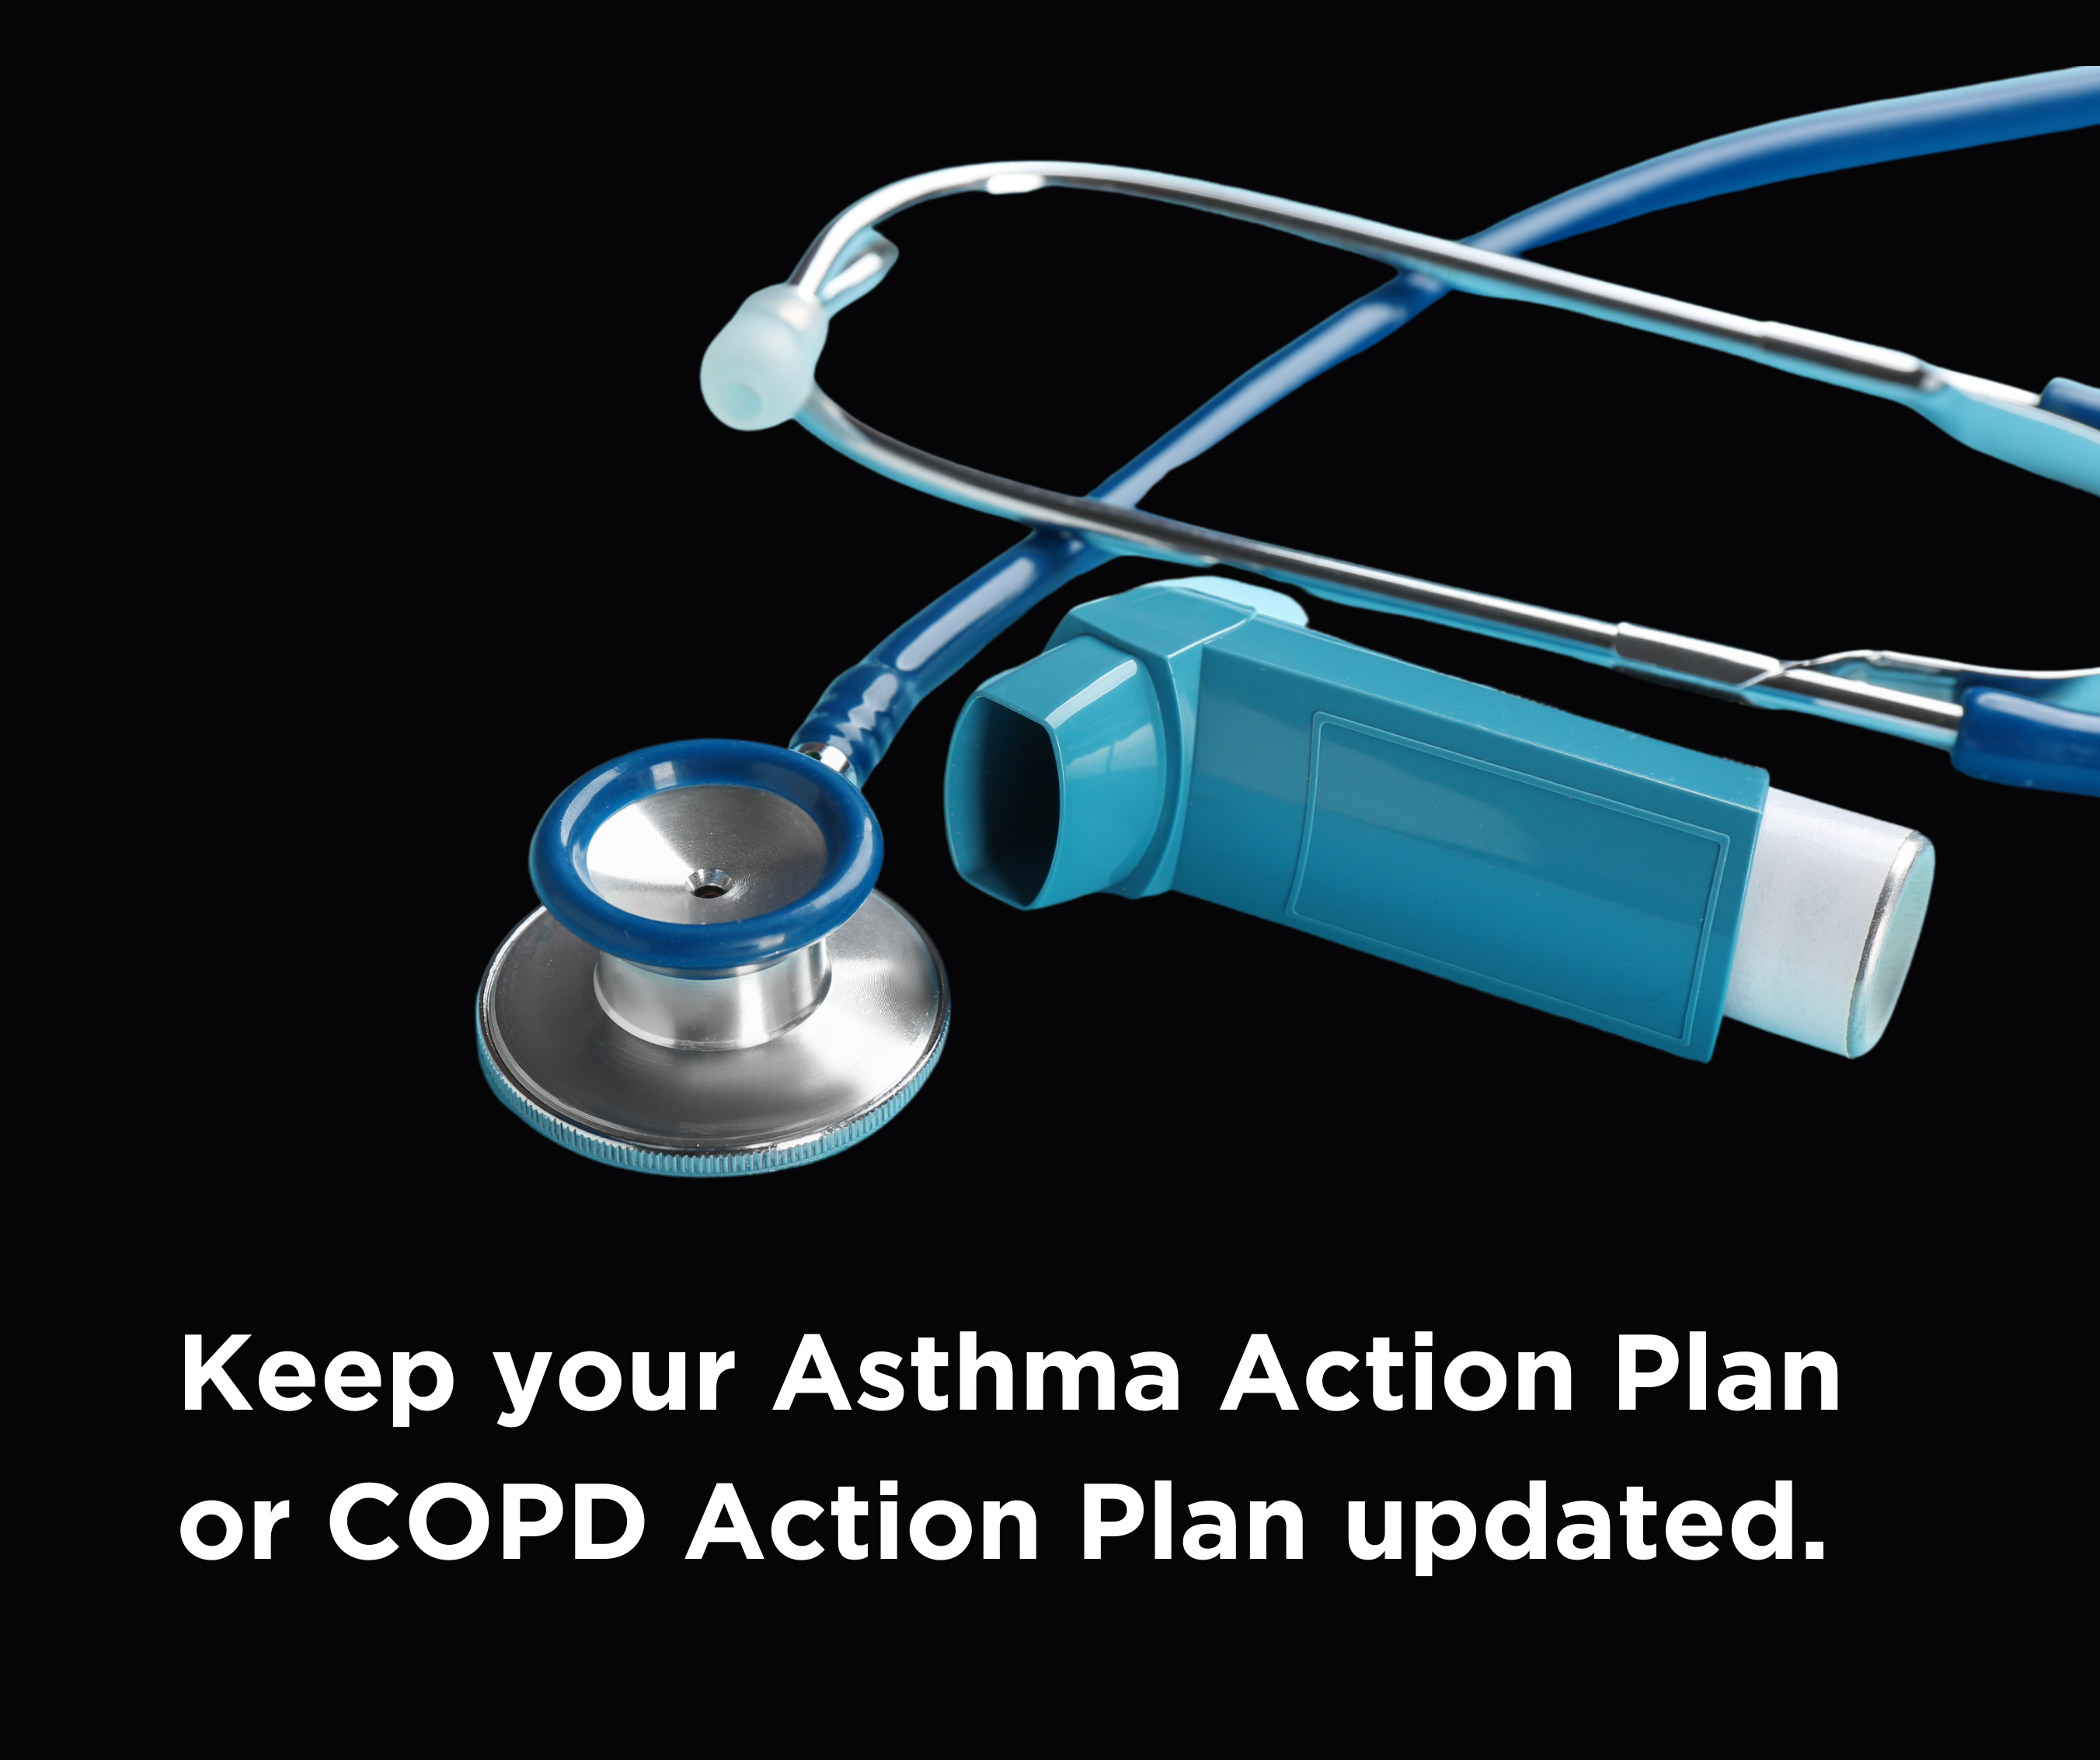 Closeup of stethoscope and inhaler with caption: "Keep your Asthma Action Plan and COPD Action Plan updated"